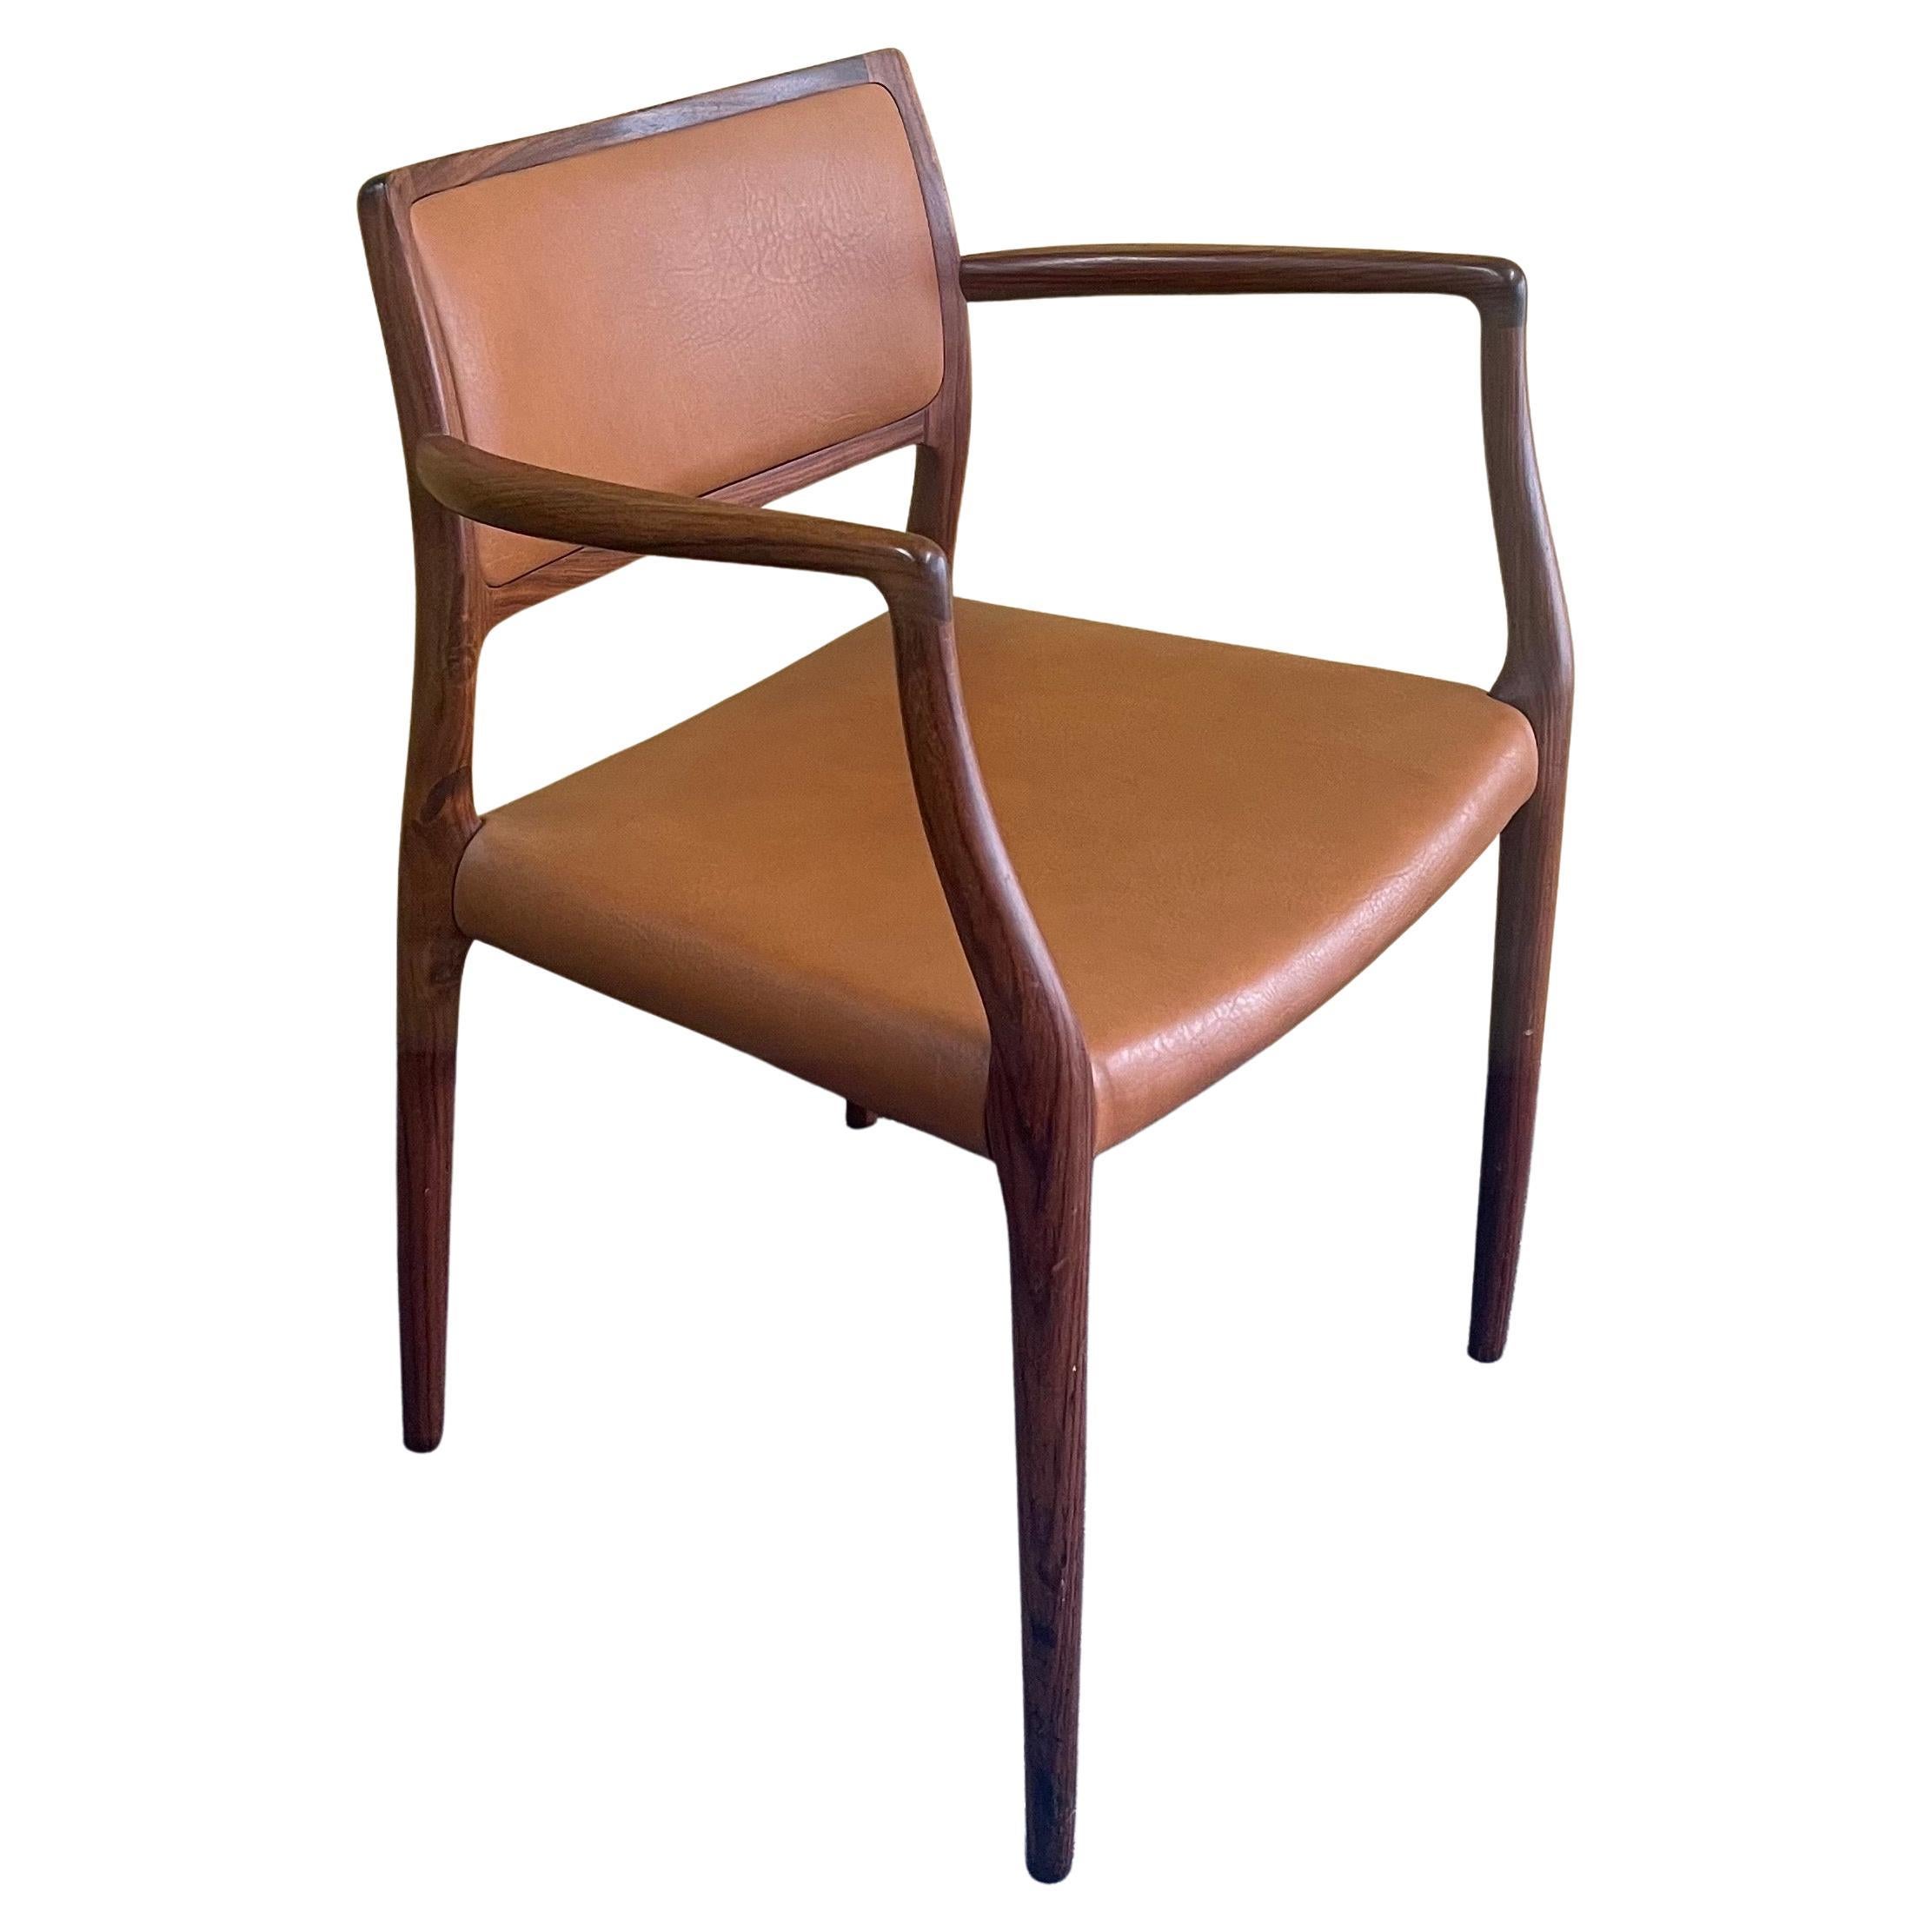 A very nice set of eight model #65 rosewood dining arm chairs designed by Nils Moller, circa 1960s. The chairs are solid rosewood construction with the original brown leather upholstered seats. The set is in very good vintage condition and each